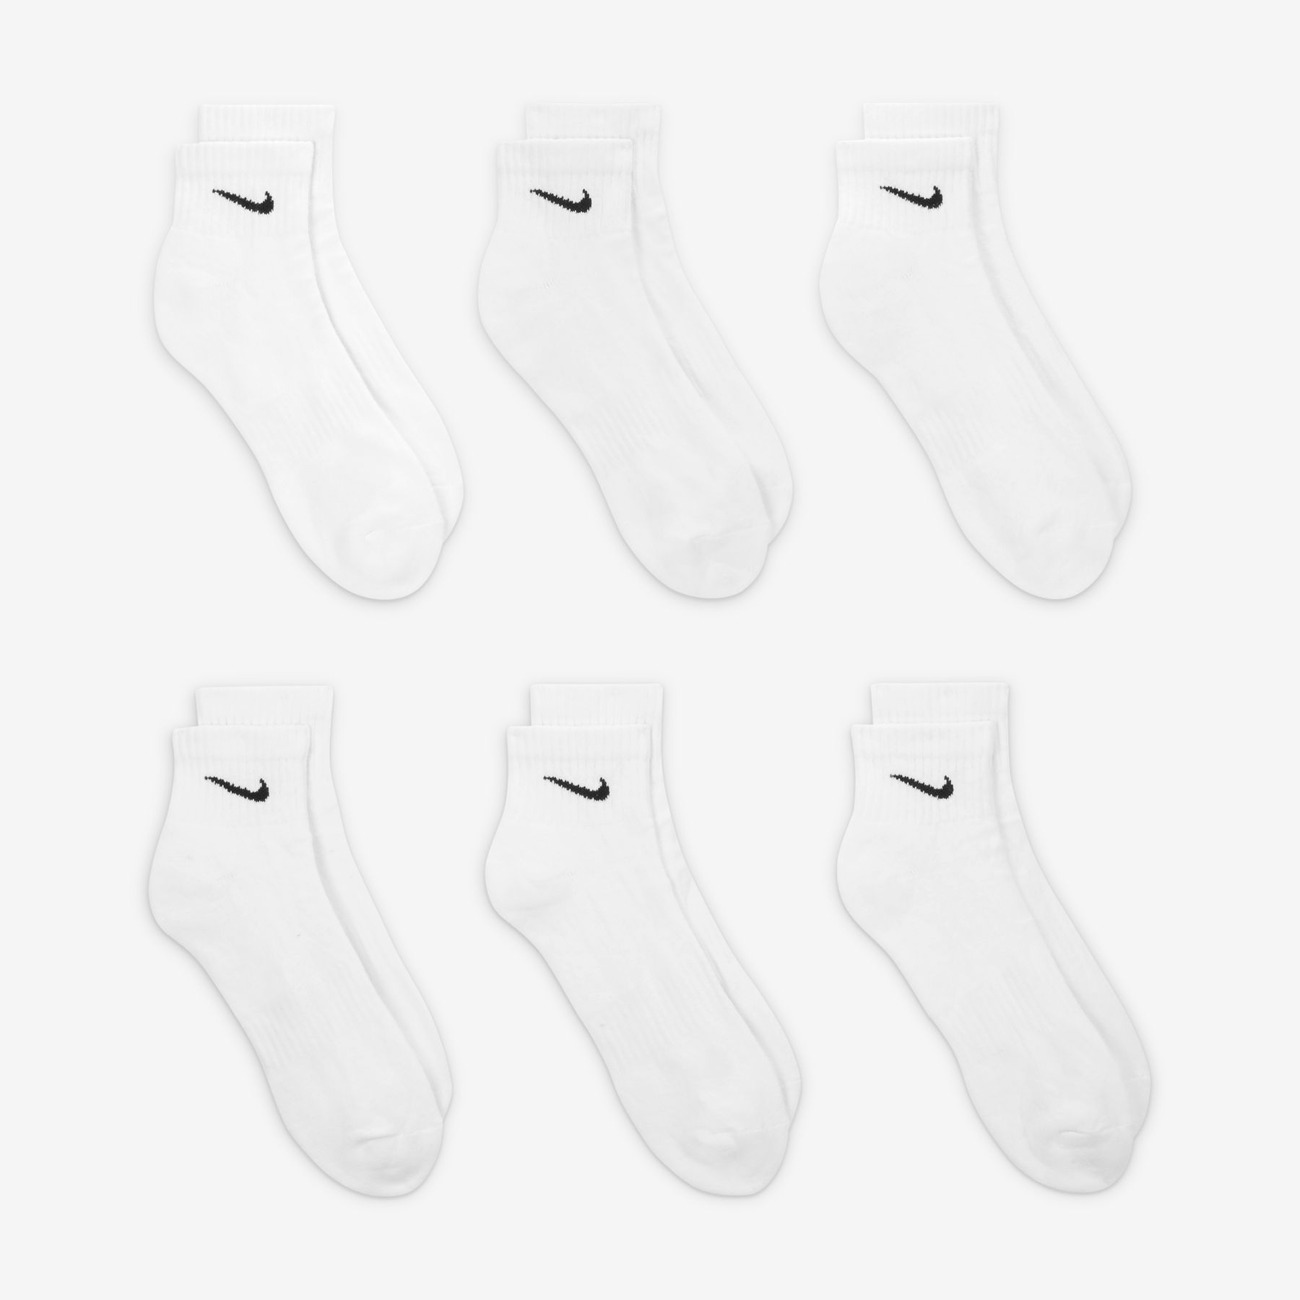 Meia Nike Everyday Cushioned Unissex (6 Pares) - Foto 3